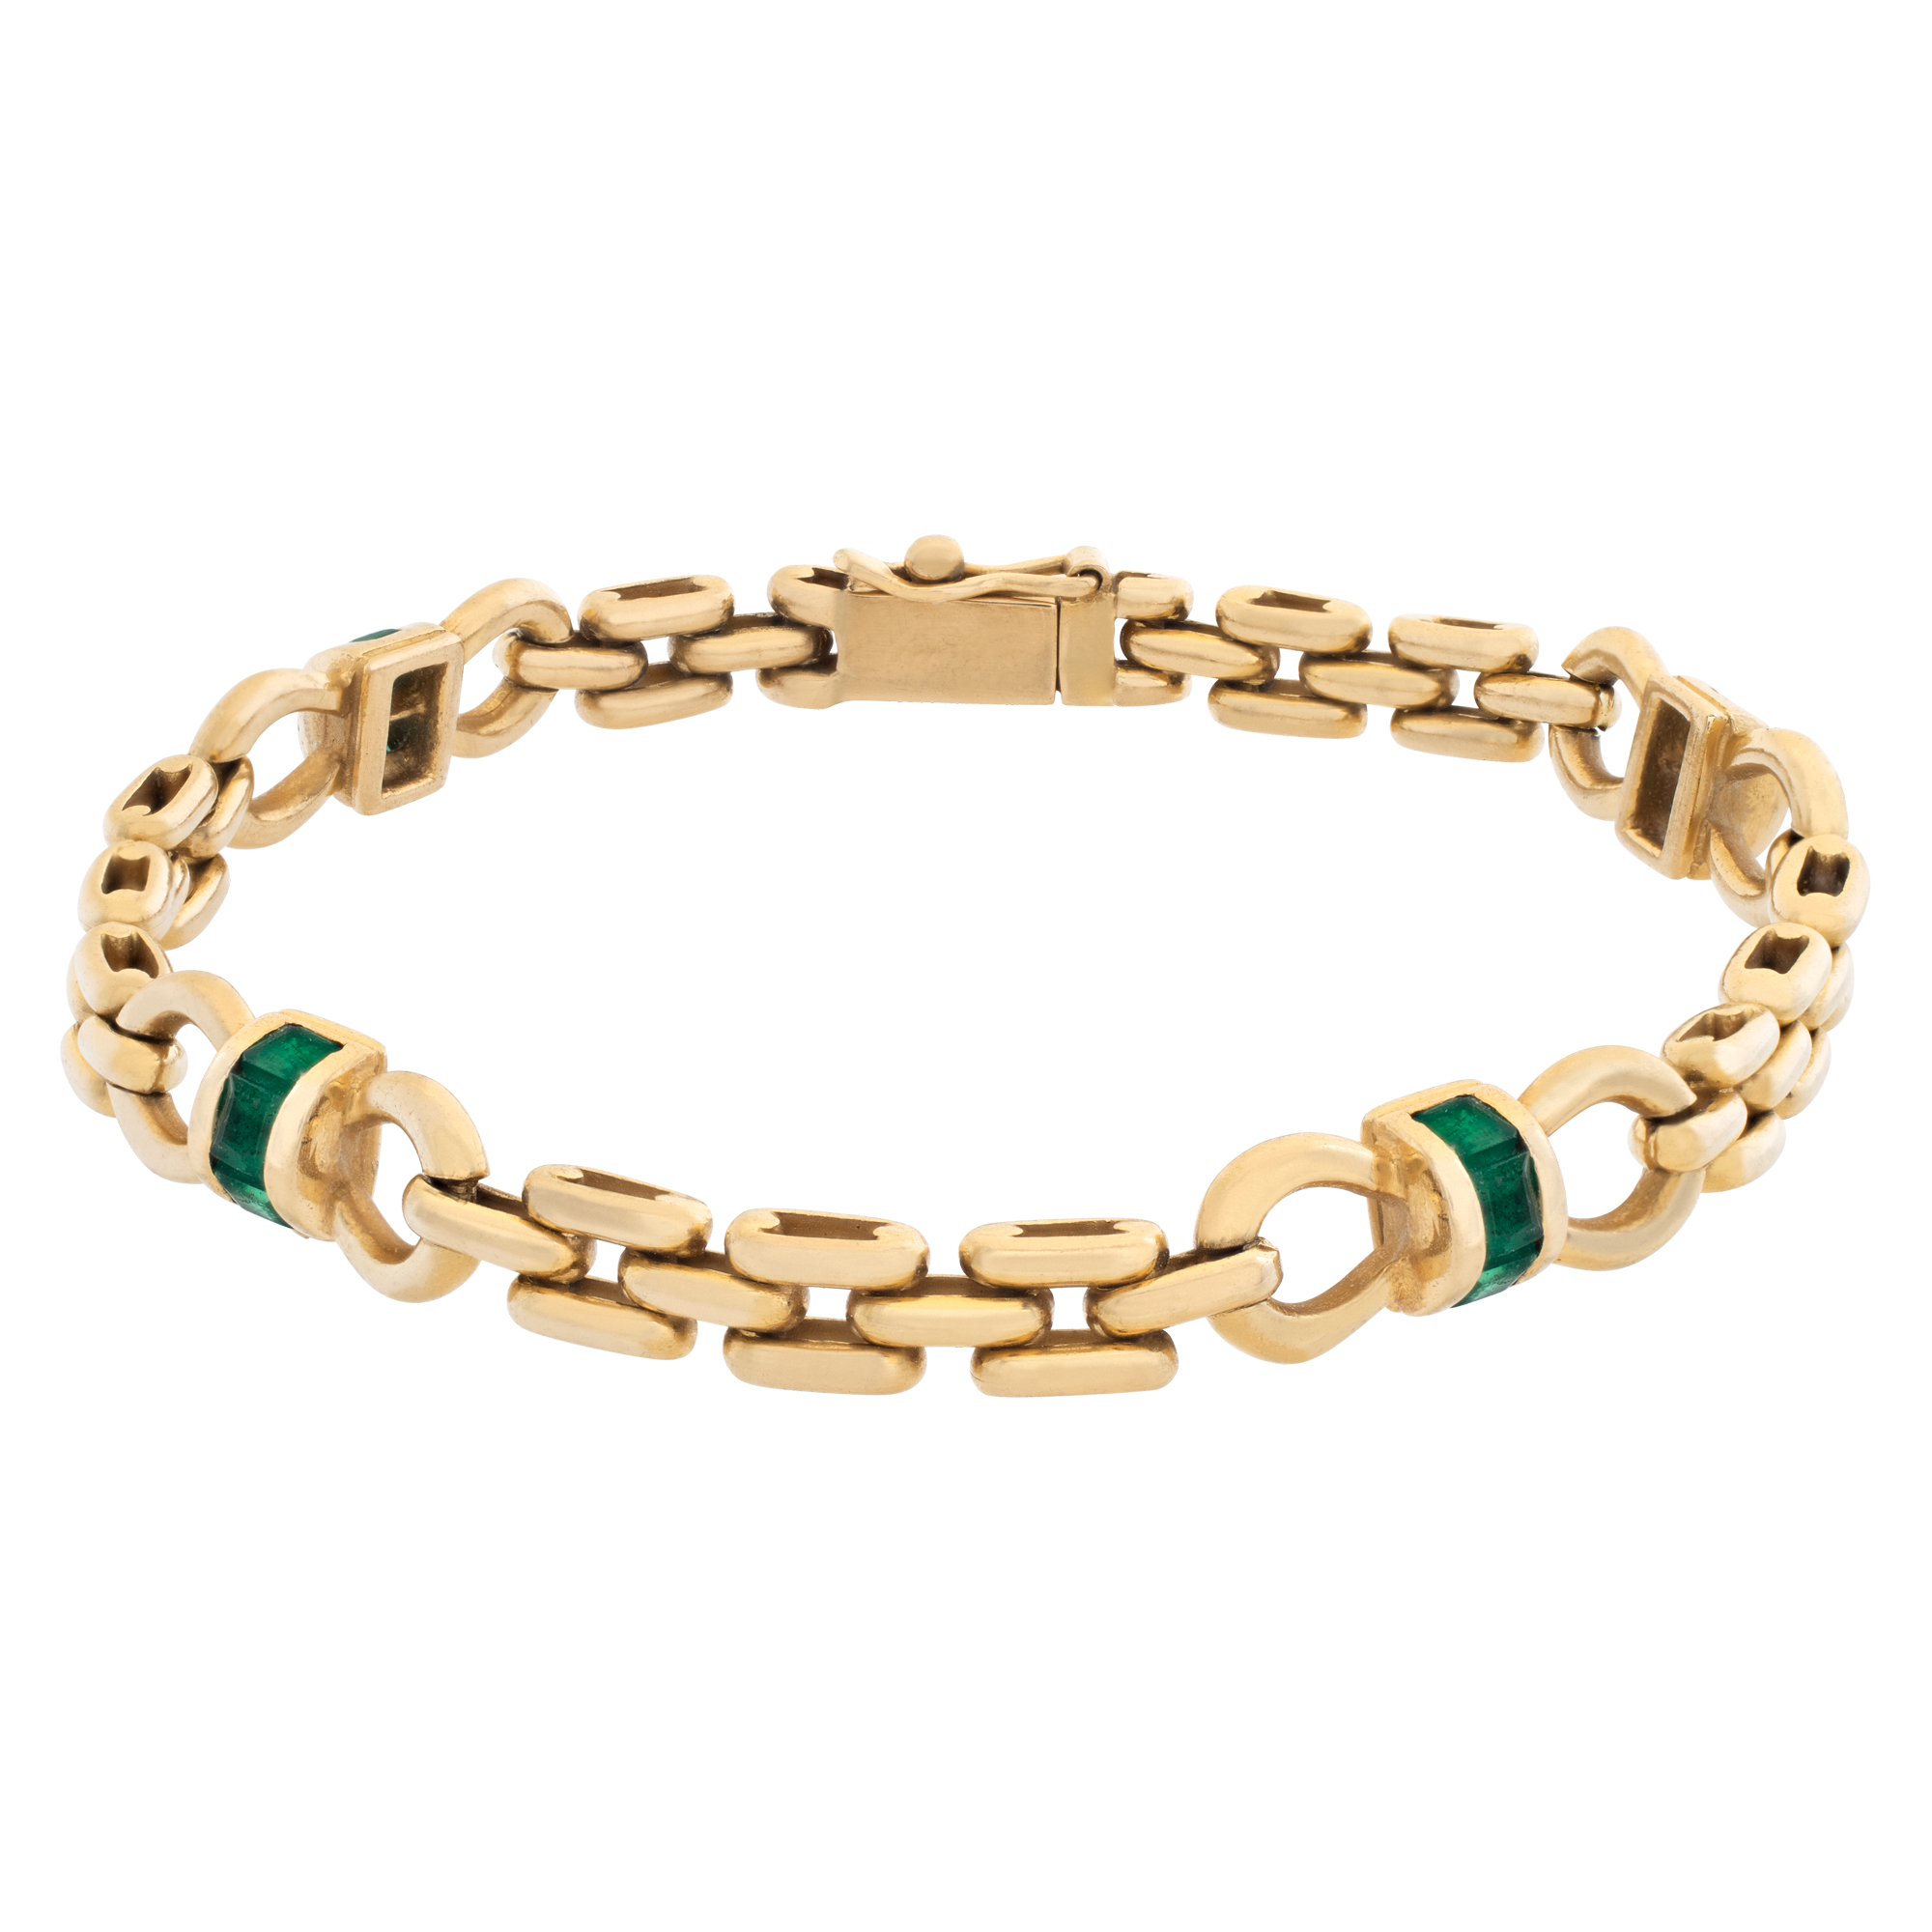 Italian style link bracelet in 18k yellow gold with emeralds